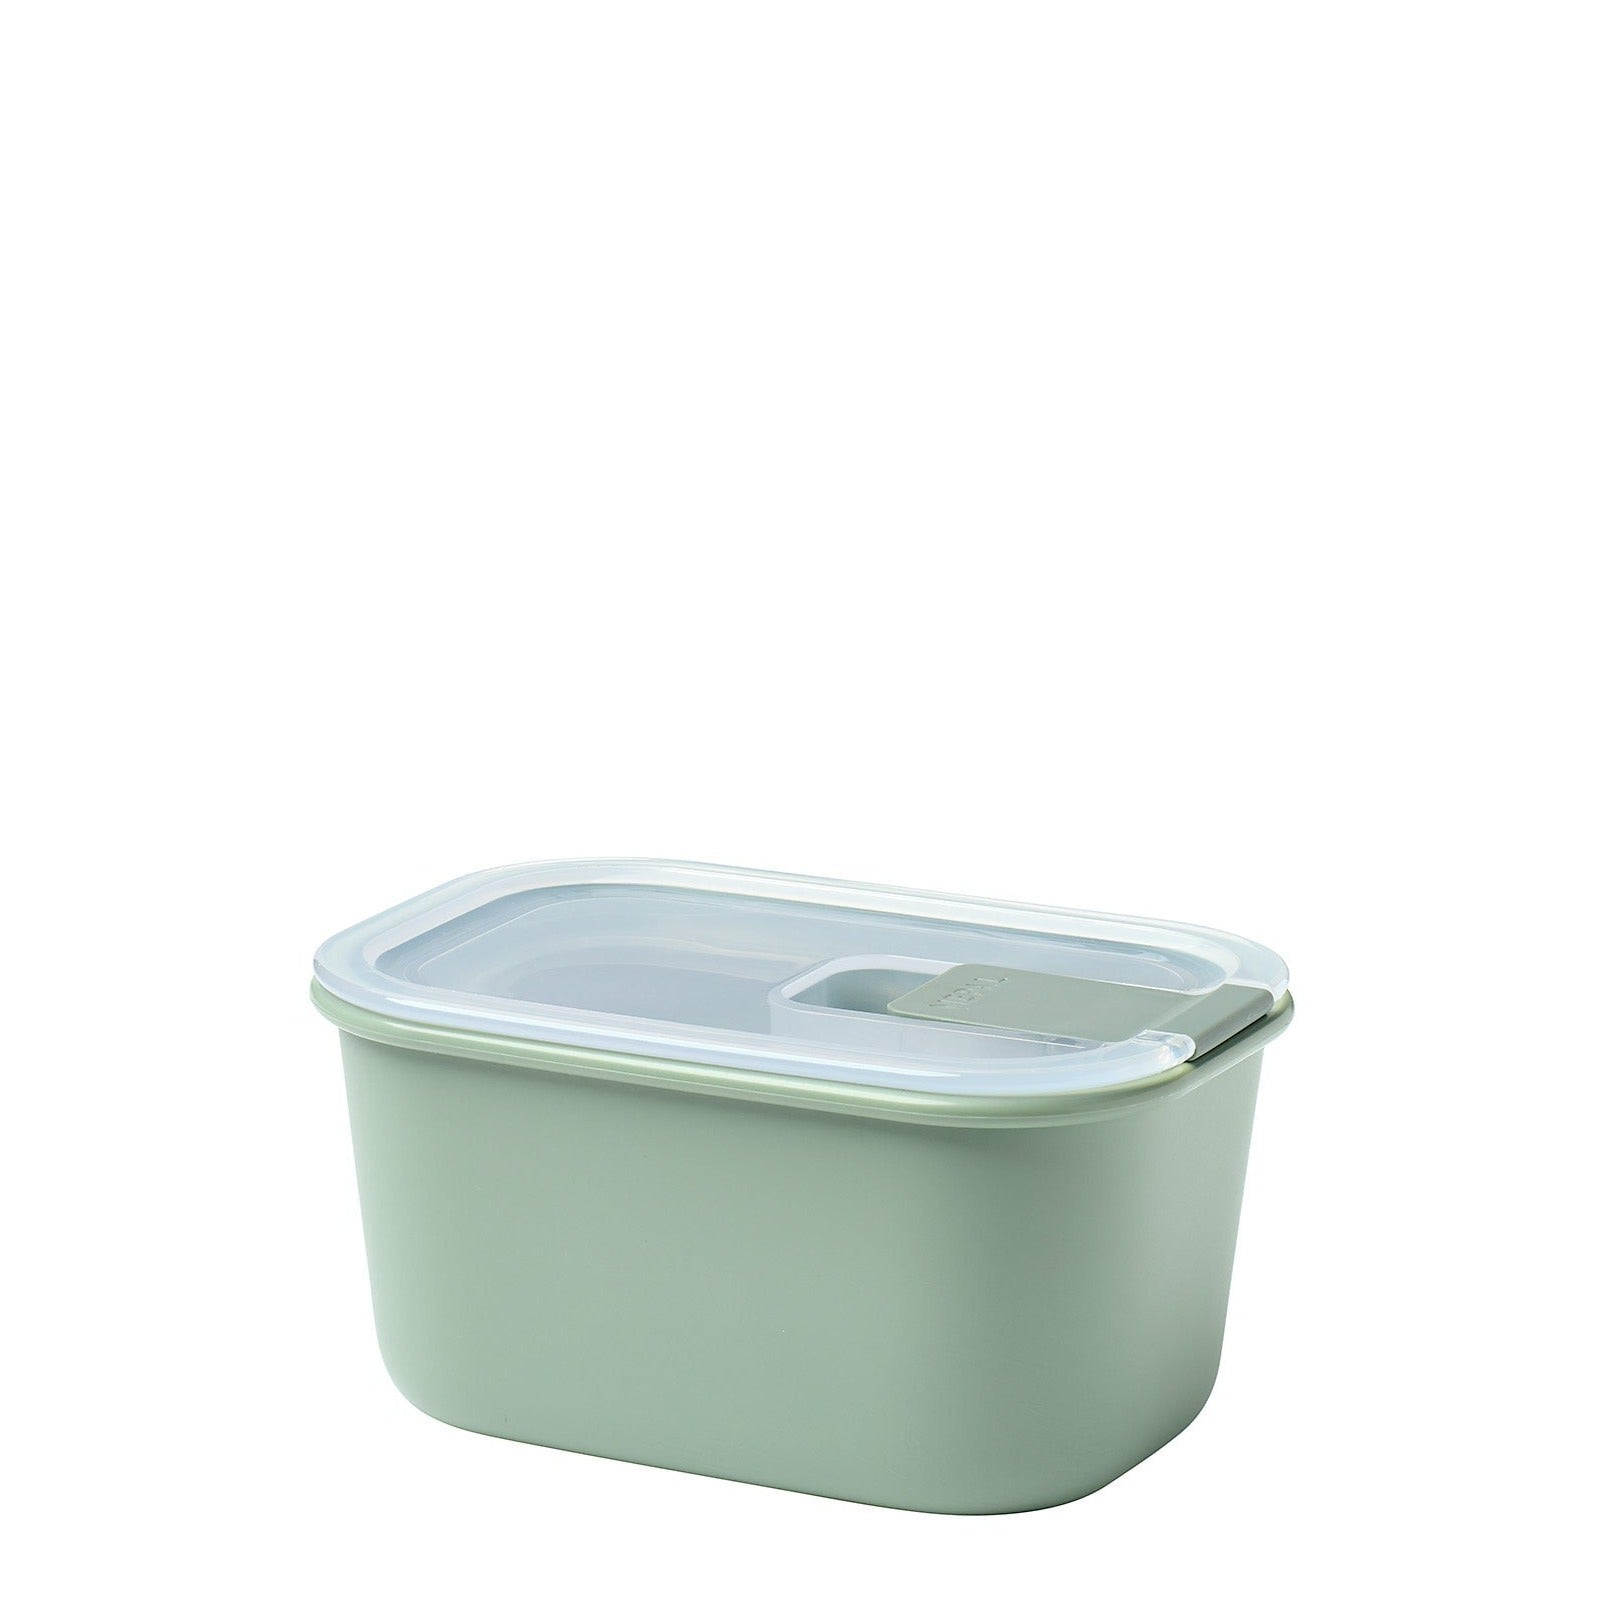 EasyClip Storage Box Food Containers Mepal Sage 15oz 